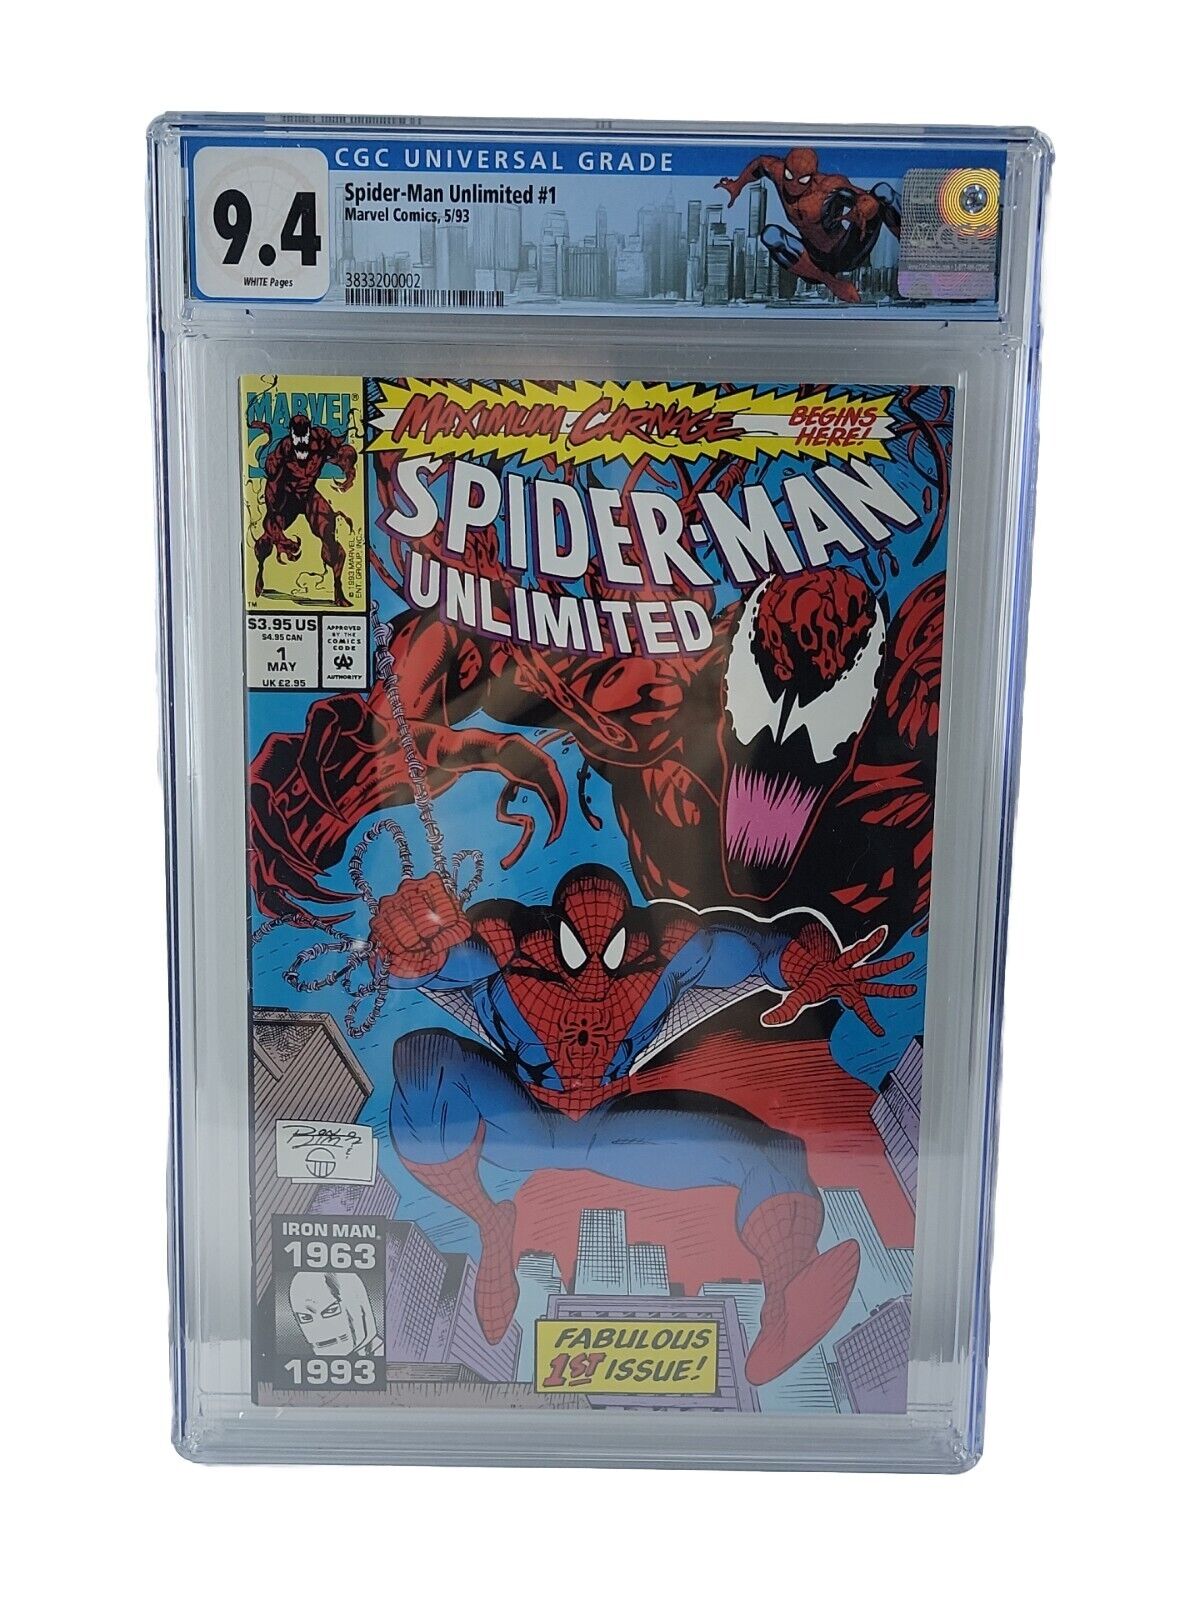 Spider-Man Unlimited #1 CGC 9.4 1st App of Shriek 1993 Marvel Comics White Pages